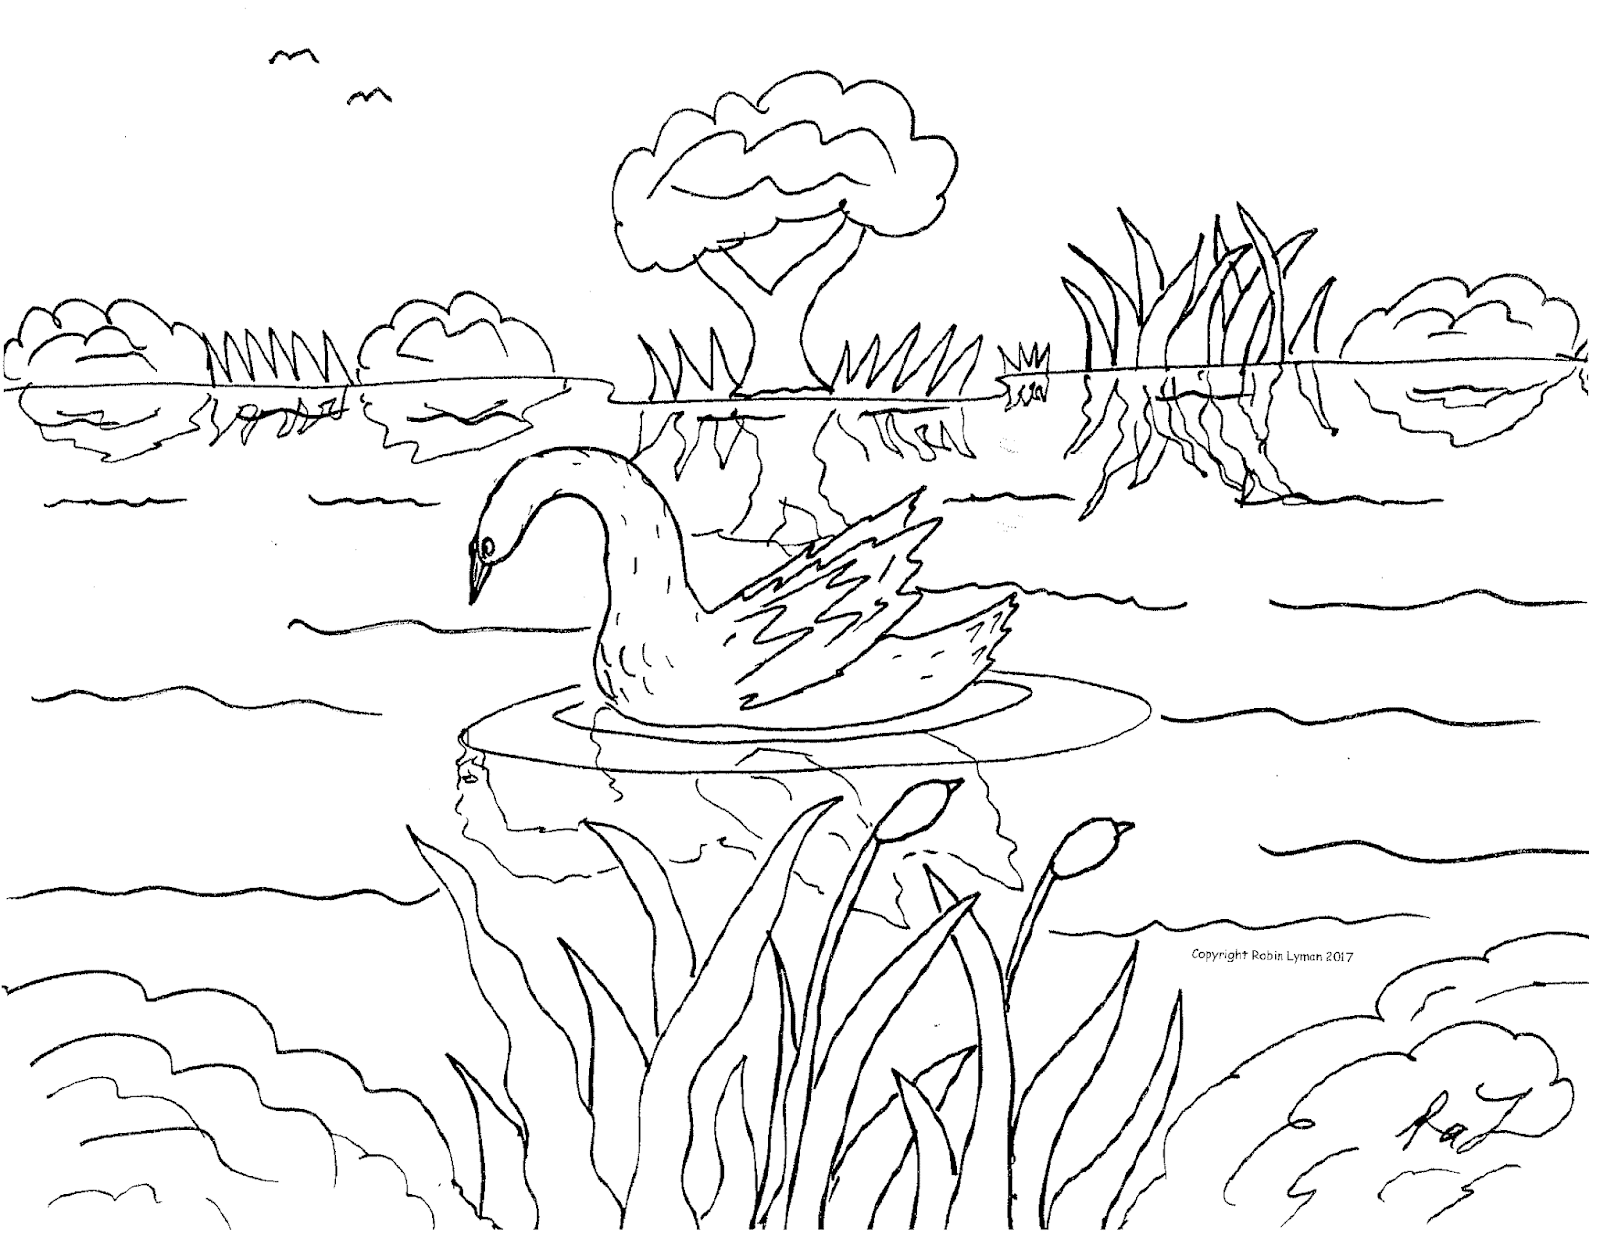 Robin's Great Coloring Pages: Swans coloring pages